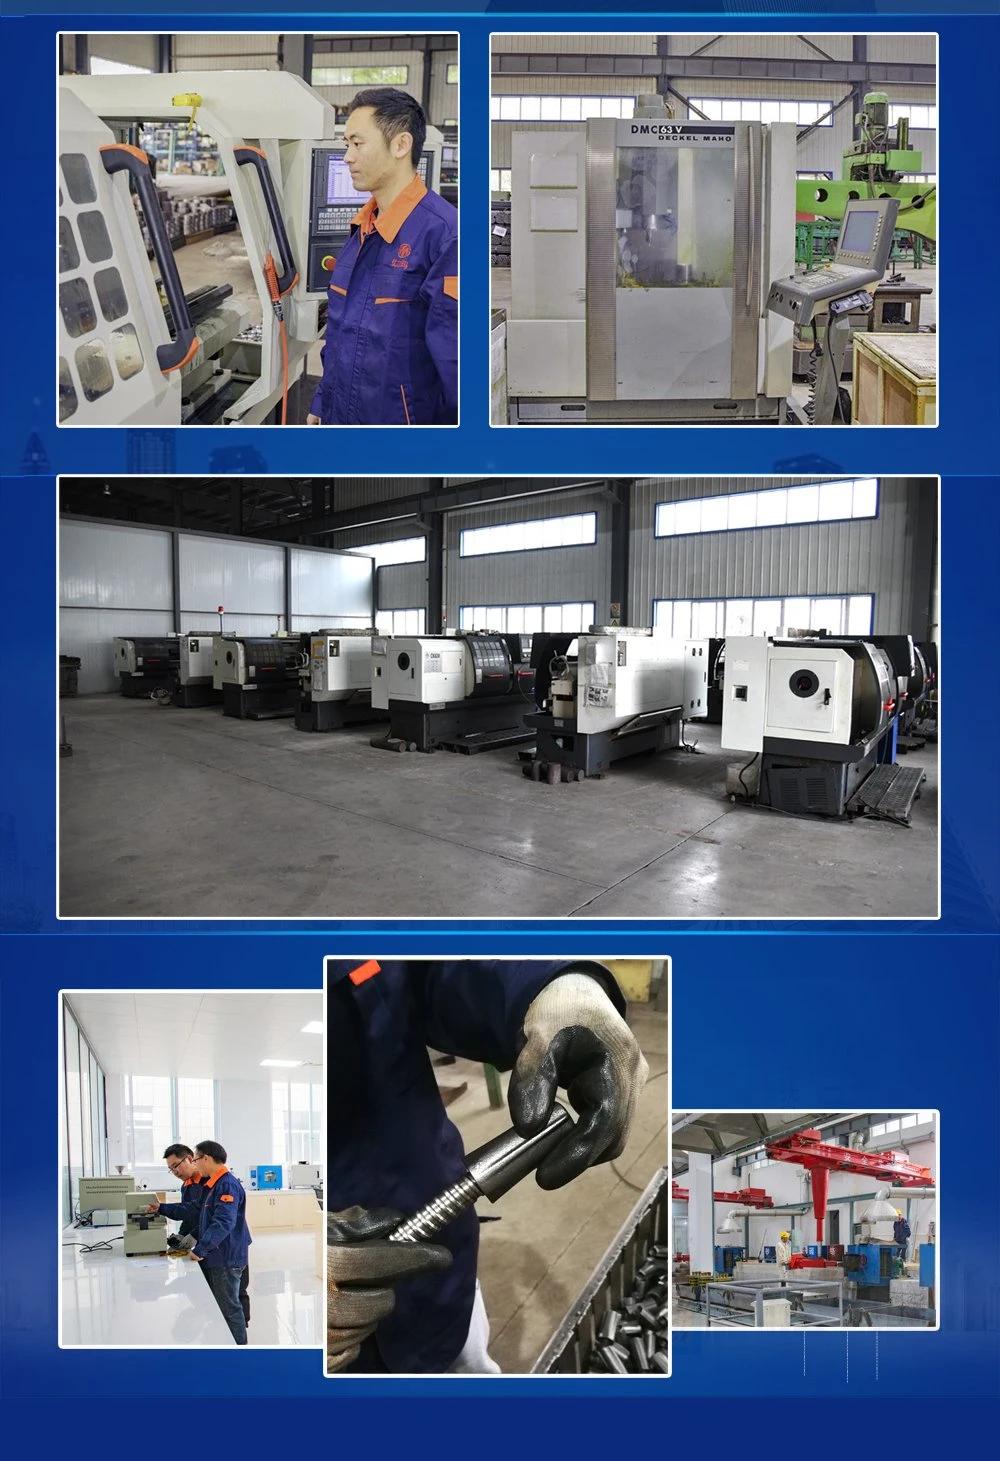 Casting,Machining,Forging,Pressing,Stamping,Construction,Component,Hot Galvanized,Power Fitting,Substation,Accessories,Auto Part,Railways,Agriculture